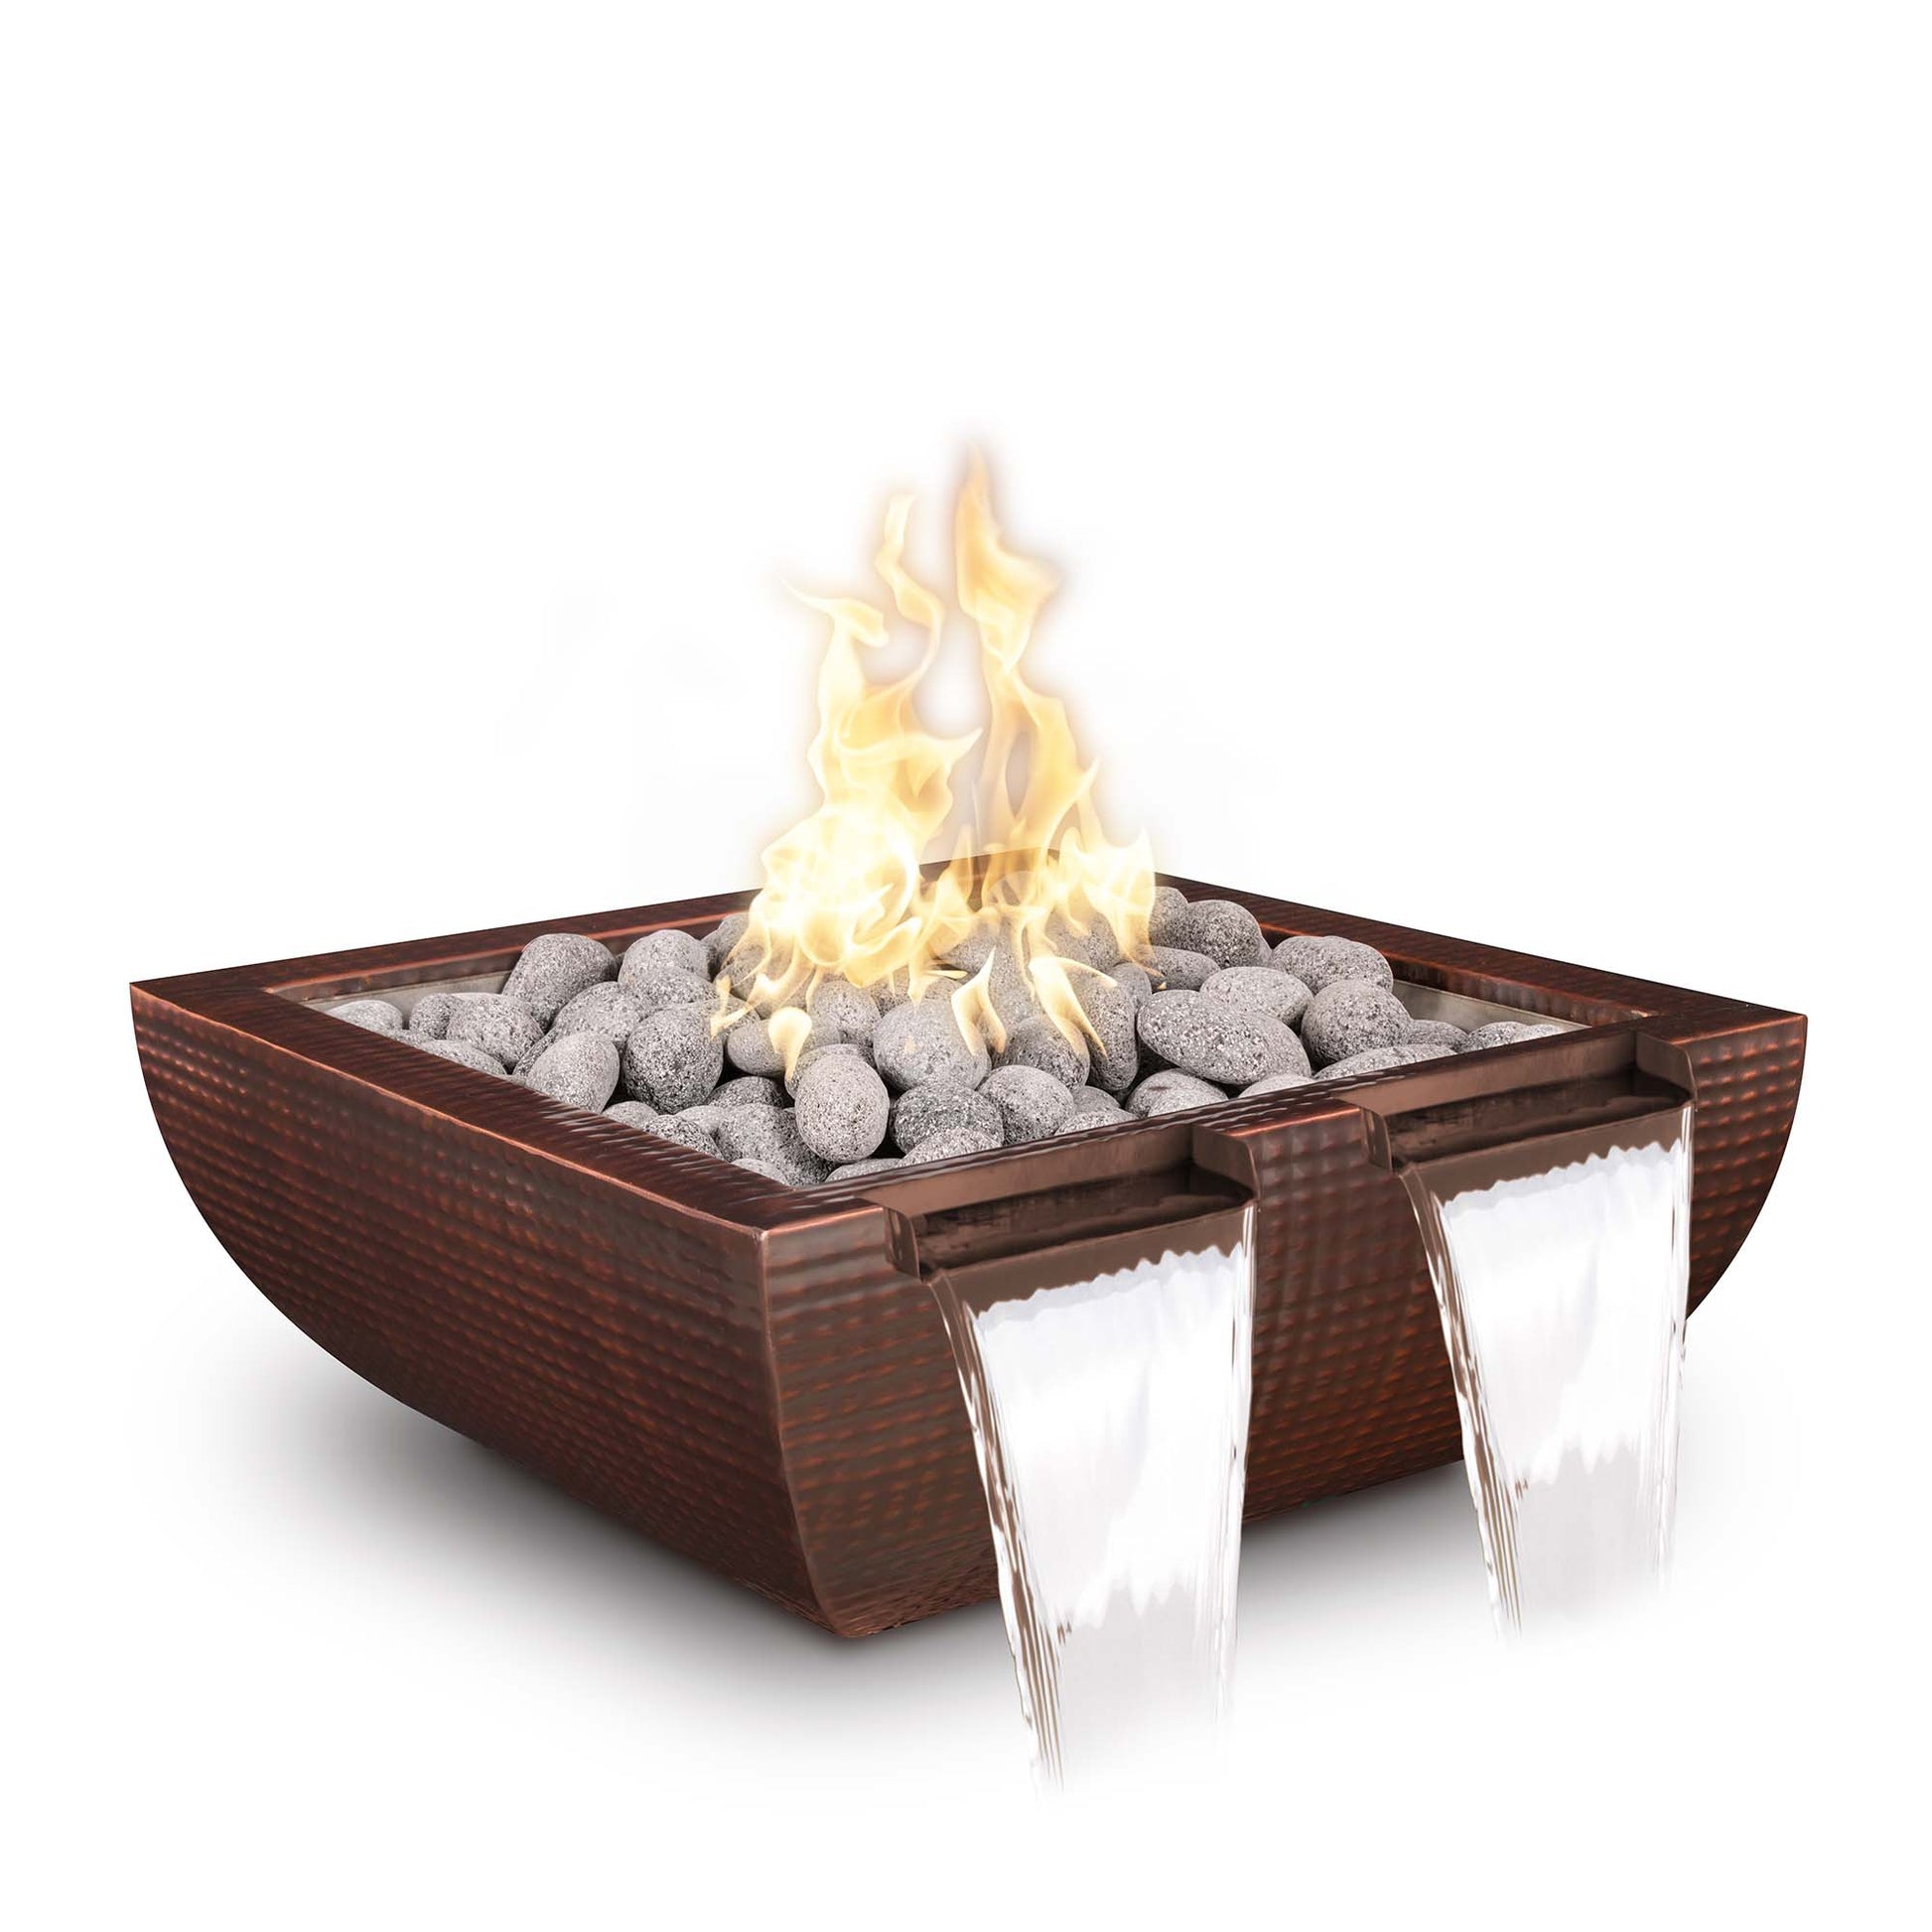 The Outdoor Plus Avalon Twin Spill 30" Black Powder Coated Metal Liquid Propane Fire & Water Bowl with Match Lit Ignition